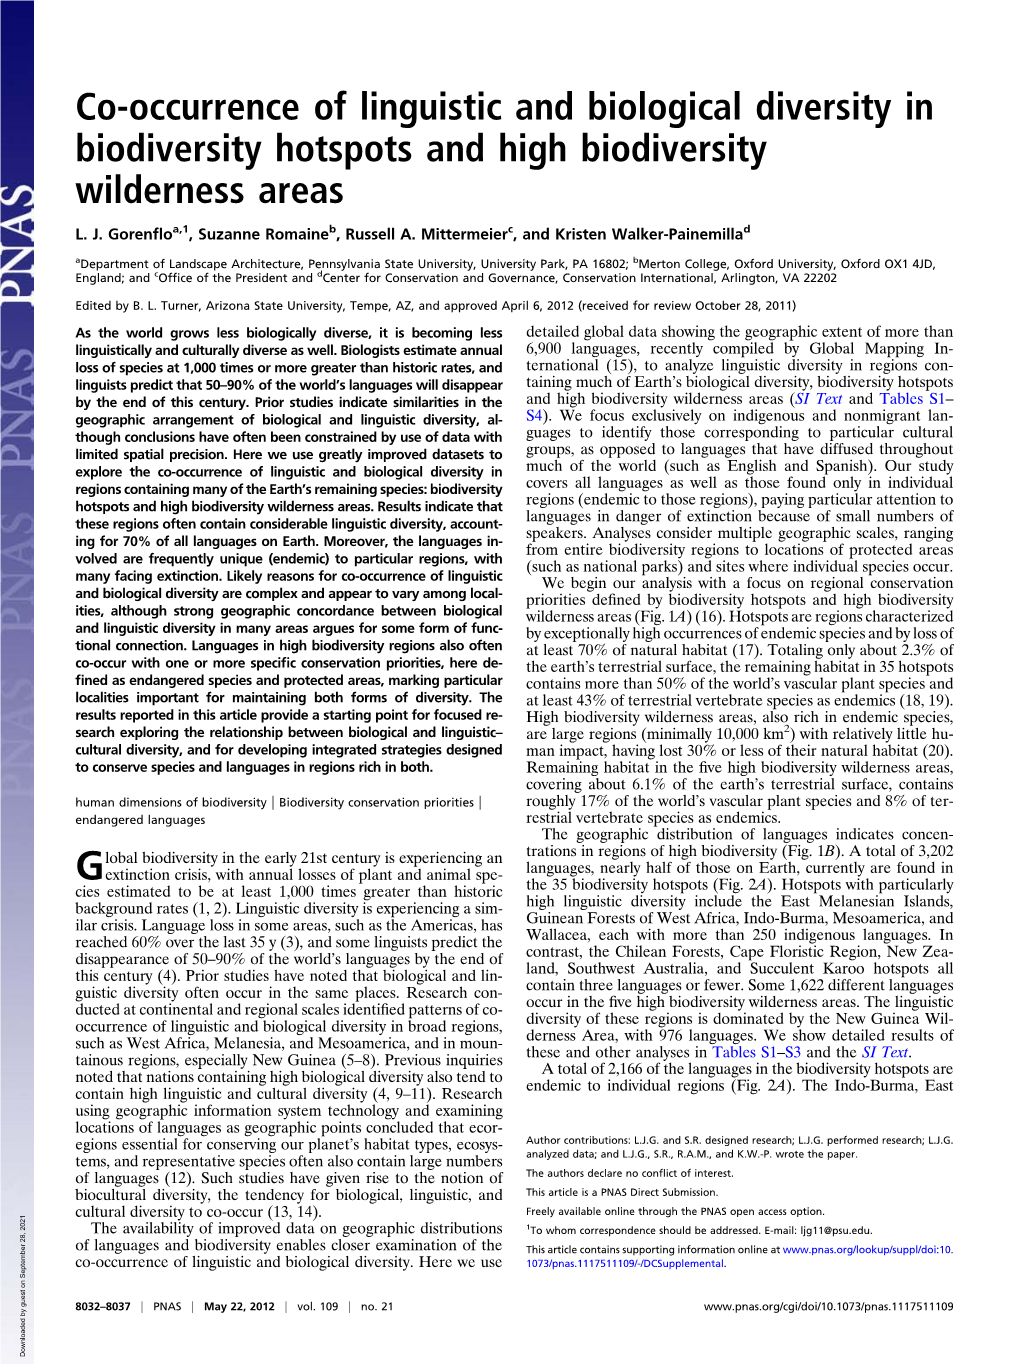 Co-Occurrence of Linguistic and Biological Diversity in Biodiversity Hotspots and High Biodiversity Wilderness Areas